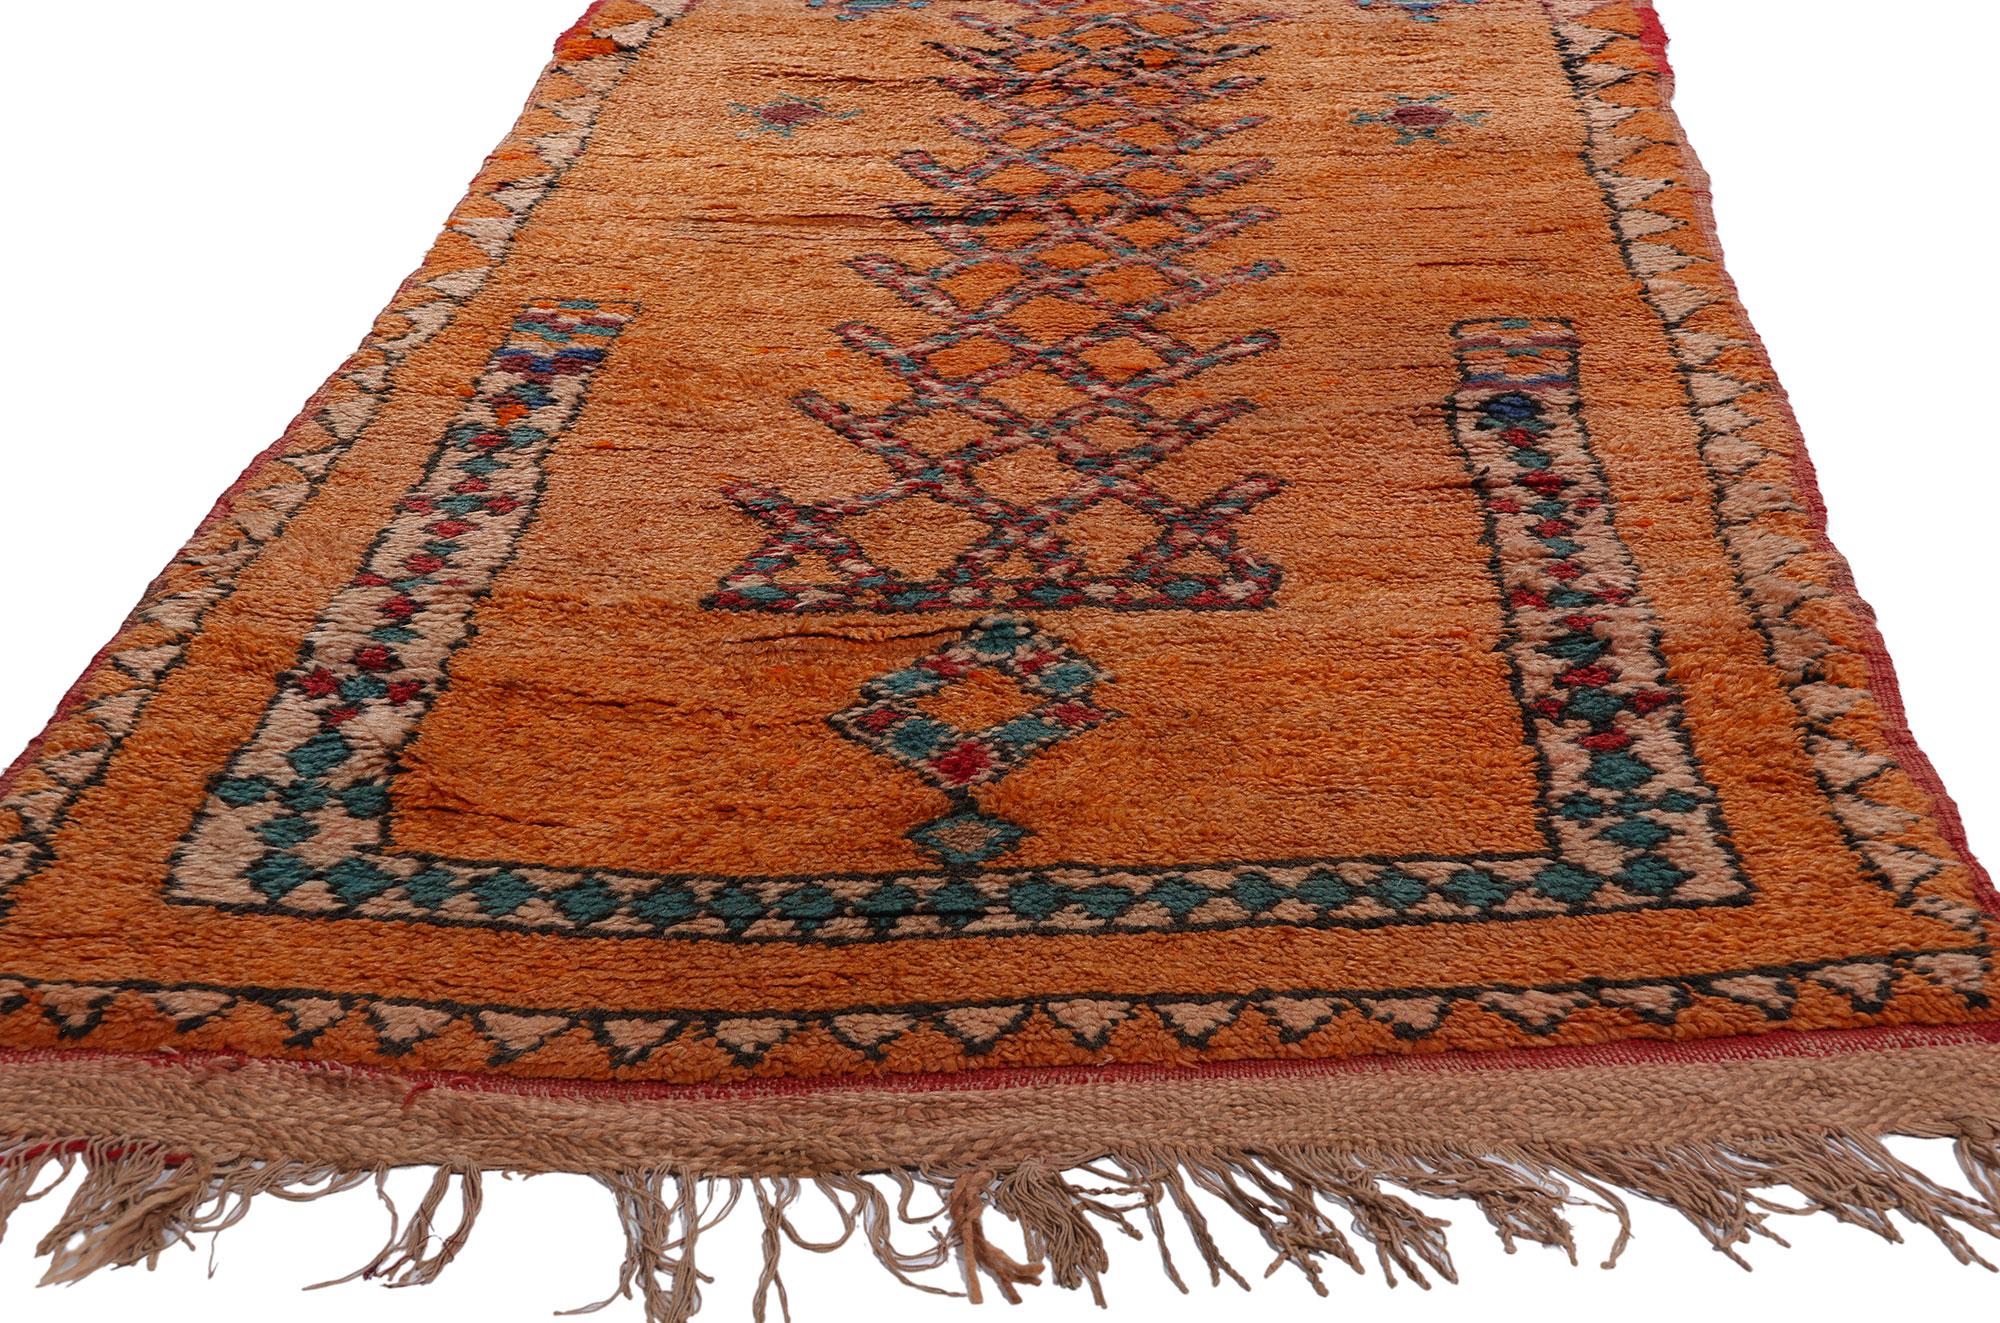 Hand-Knotted Extra-Long Vintage Boujad Moroccan Rug, Southwest Bohemian Meets Cozy Nomad